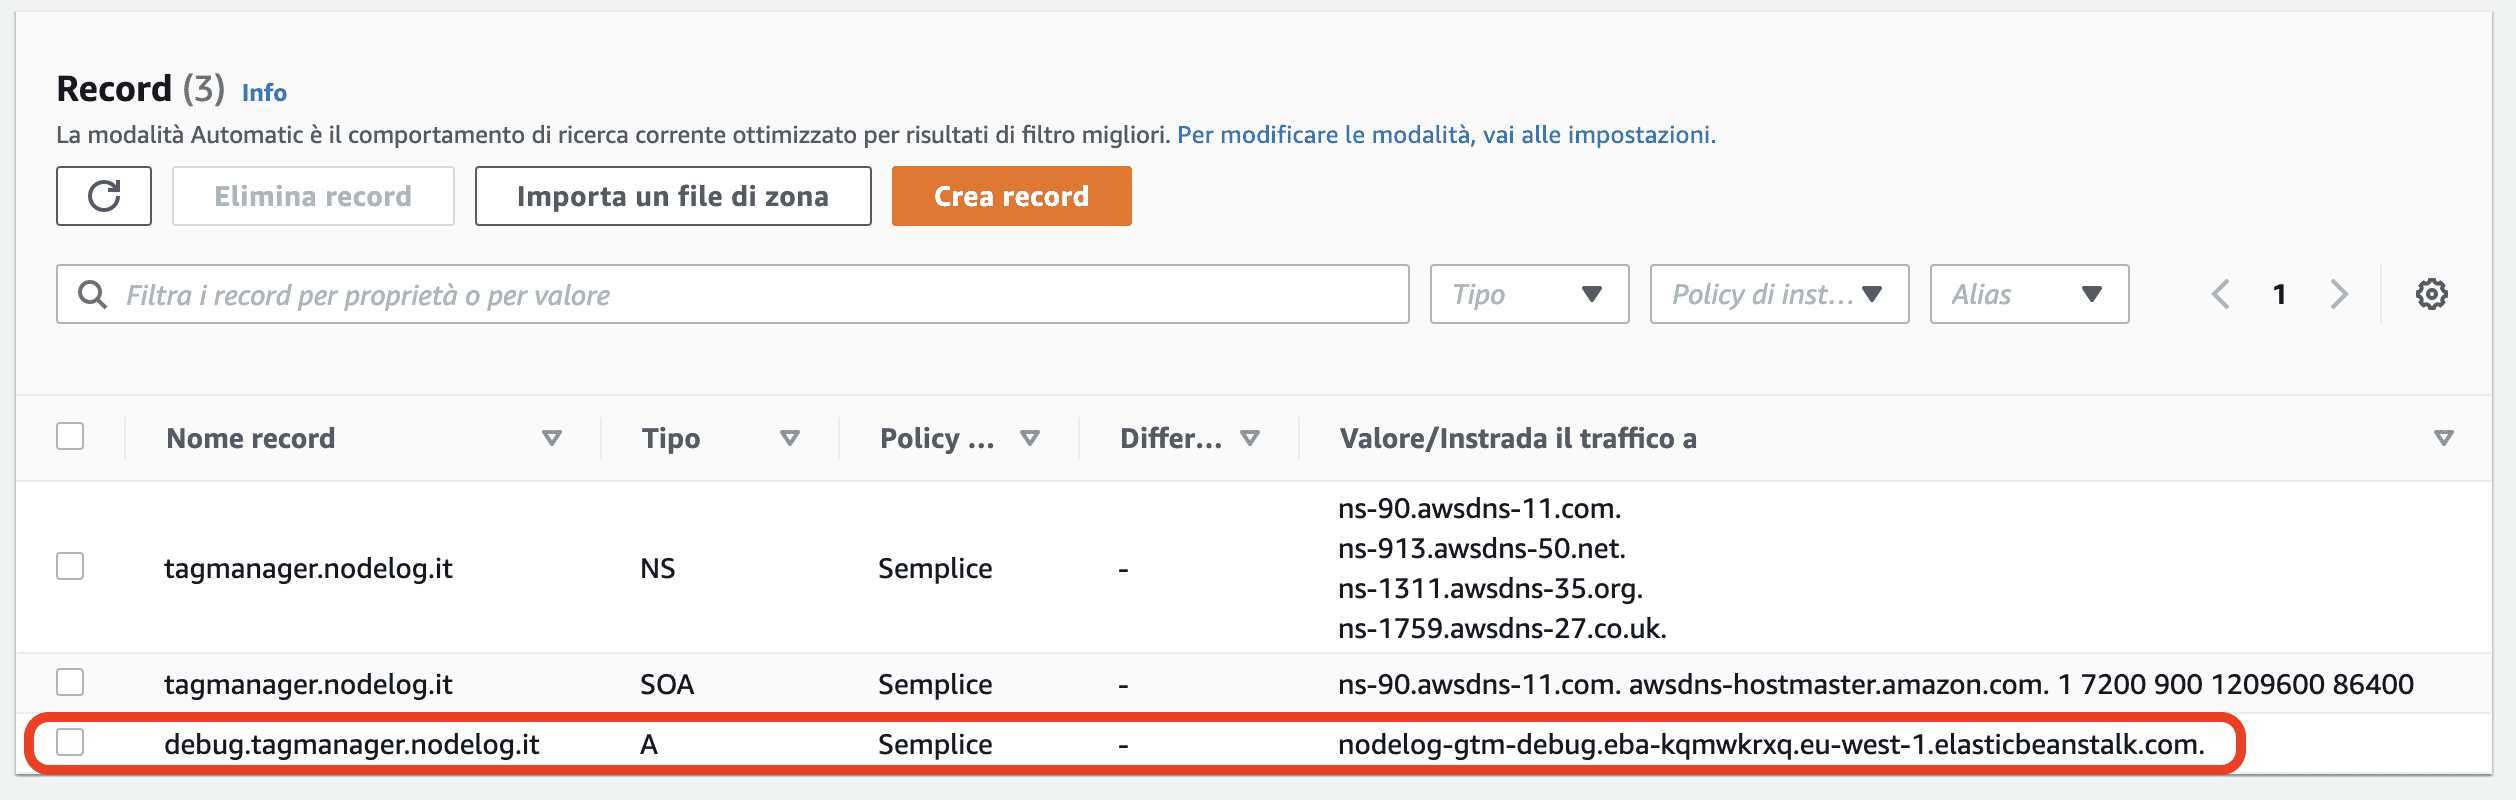 10d server side tagging aws - Come implementare il Server-Side tracking con GTM su AWS